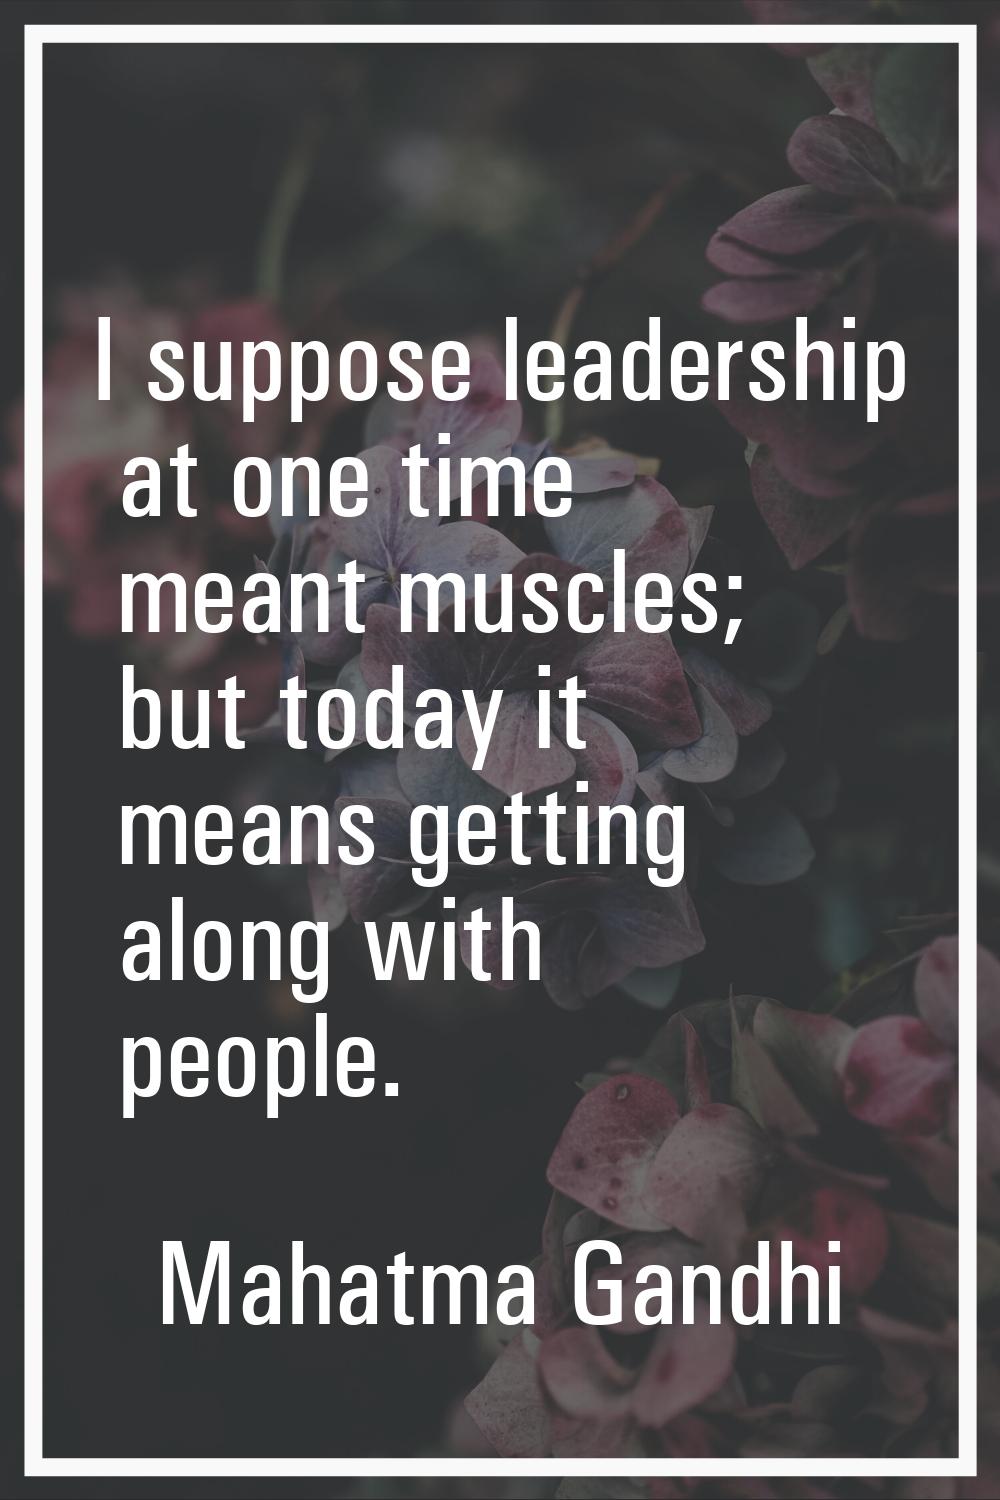 I suppose leadership at one time meant muscles; but today it means getting along with people.